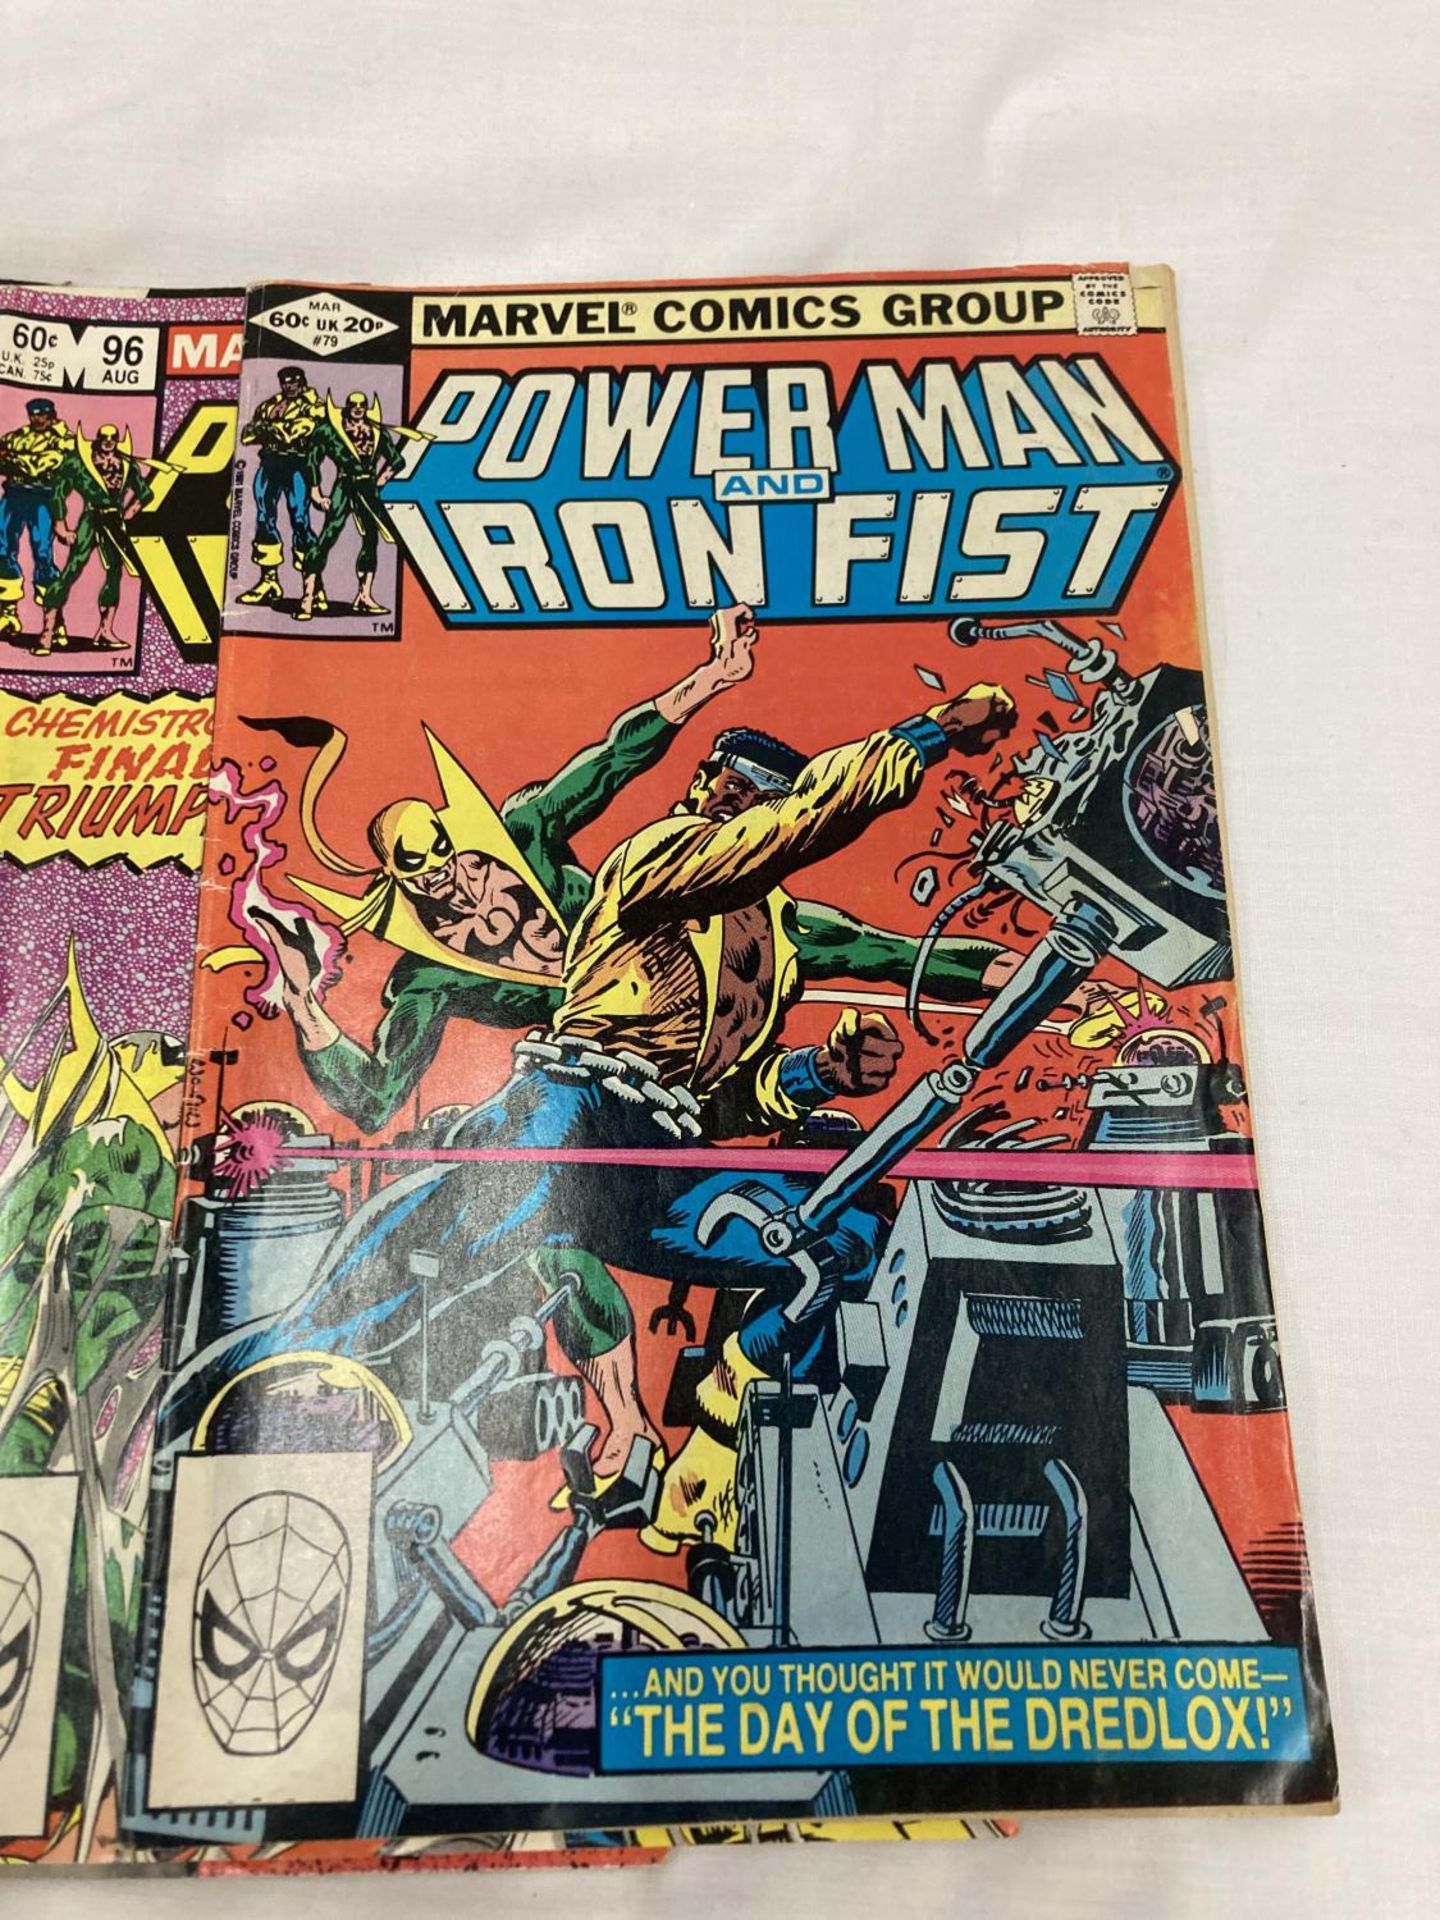 FIVE VINTAGE MARVEL POWERMAN AND IRON FISH COMICS FROM THE 1970'S - Image 4 of 14